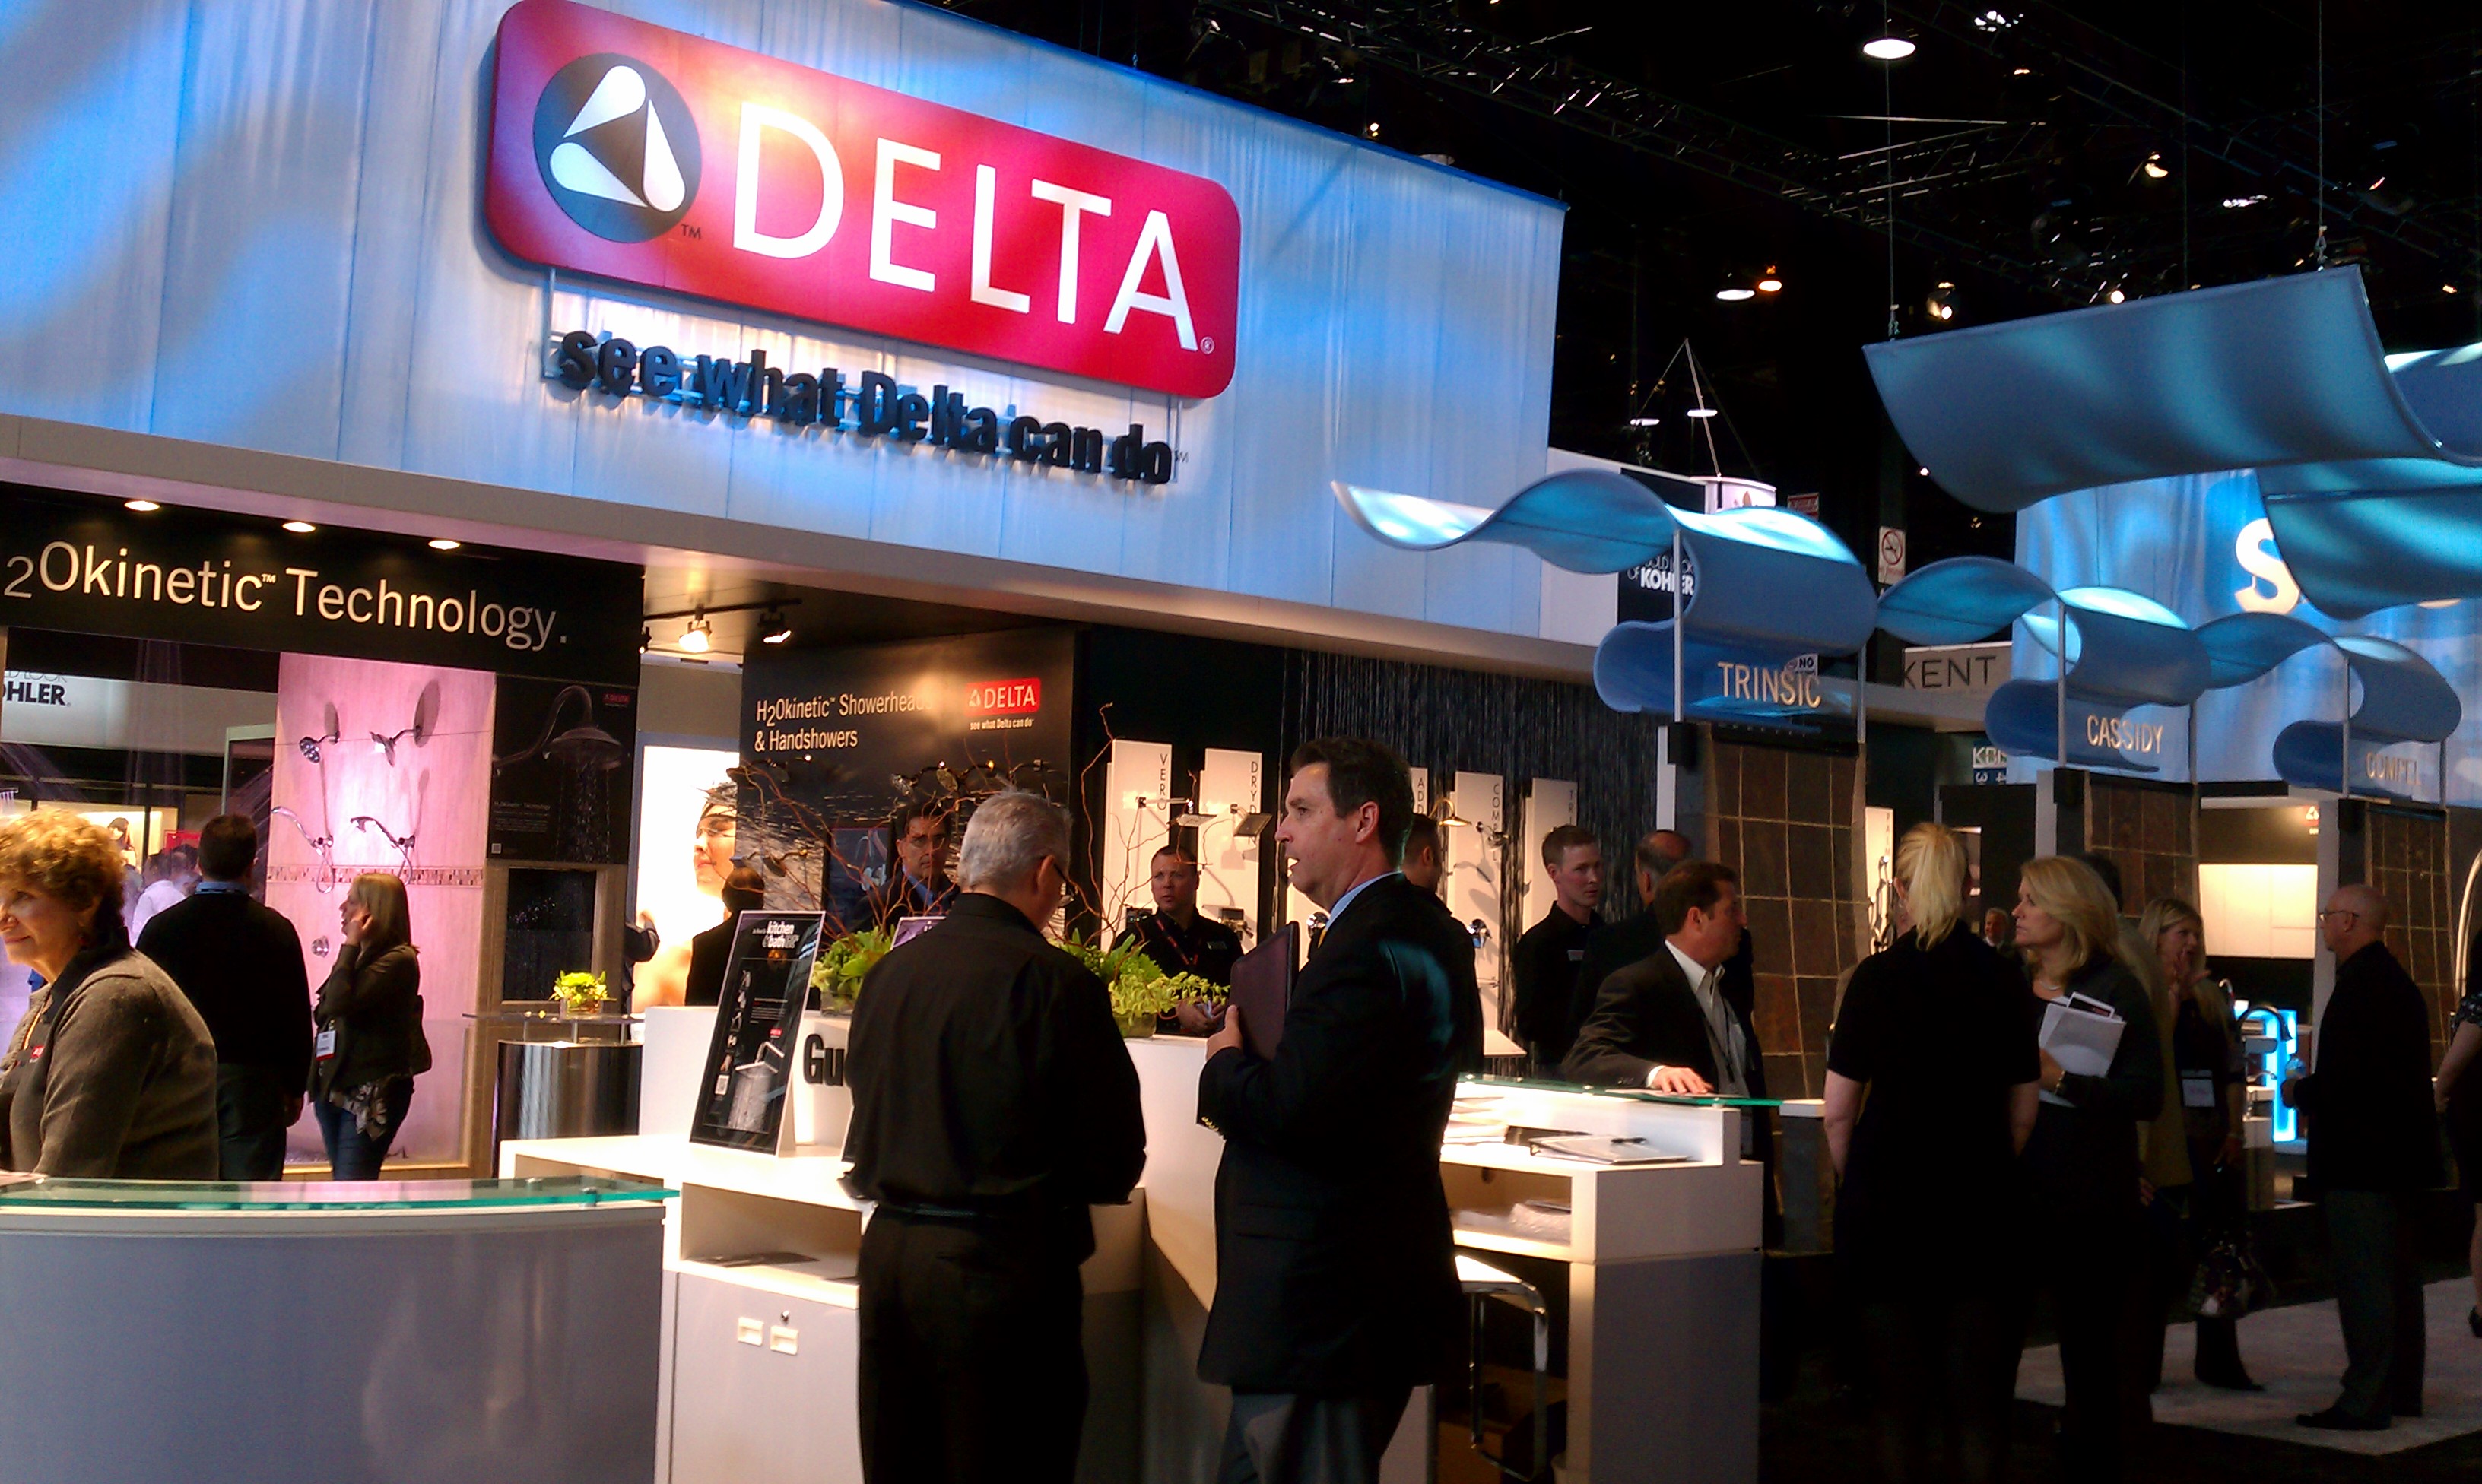 Trade shows are a great opportunity for social engagement